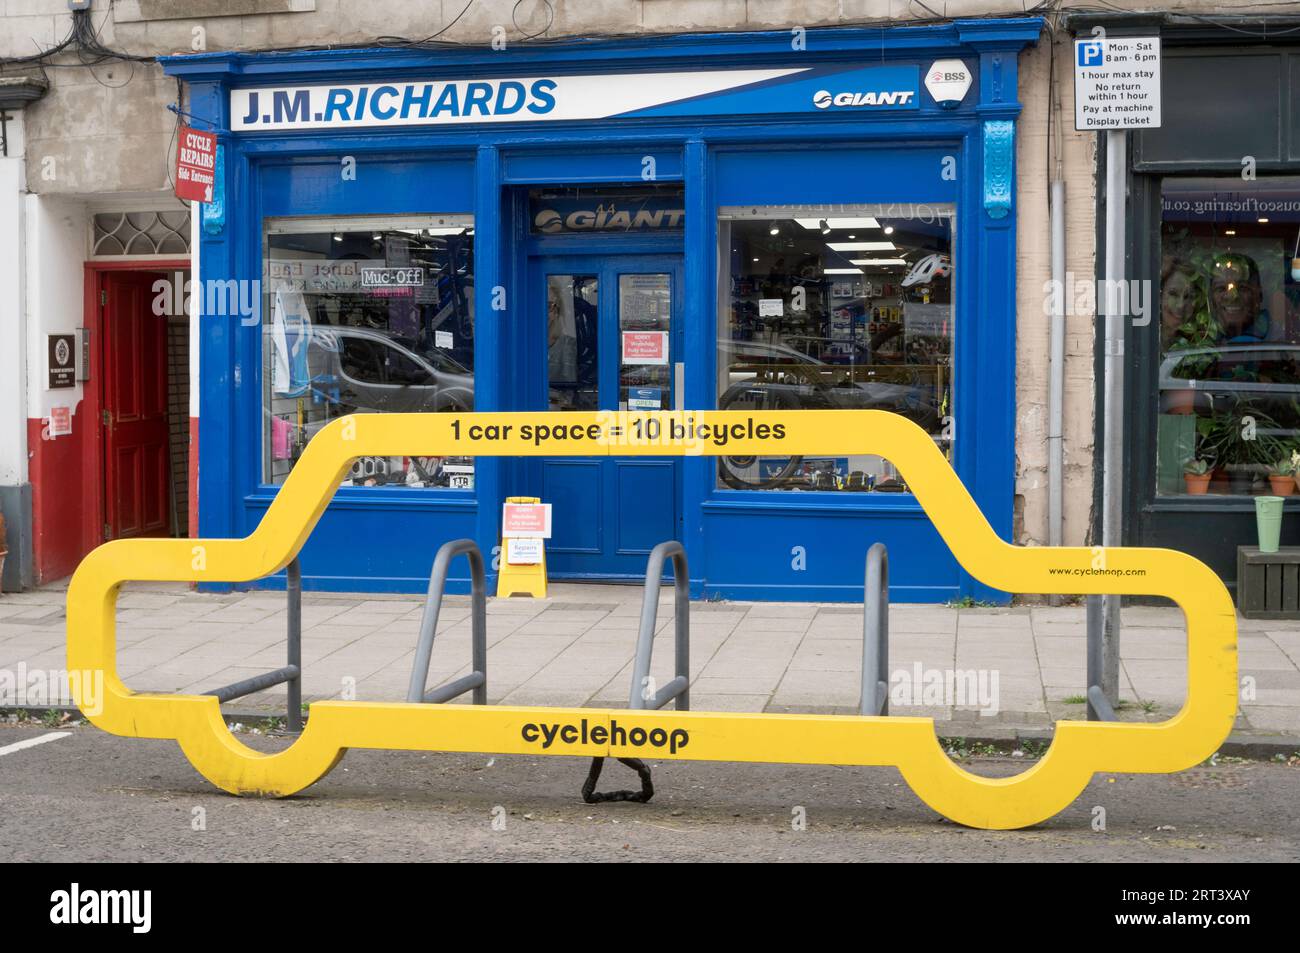 A bicycle parking bay or cyclehoop Stock Photo